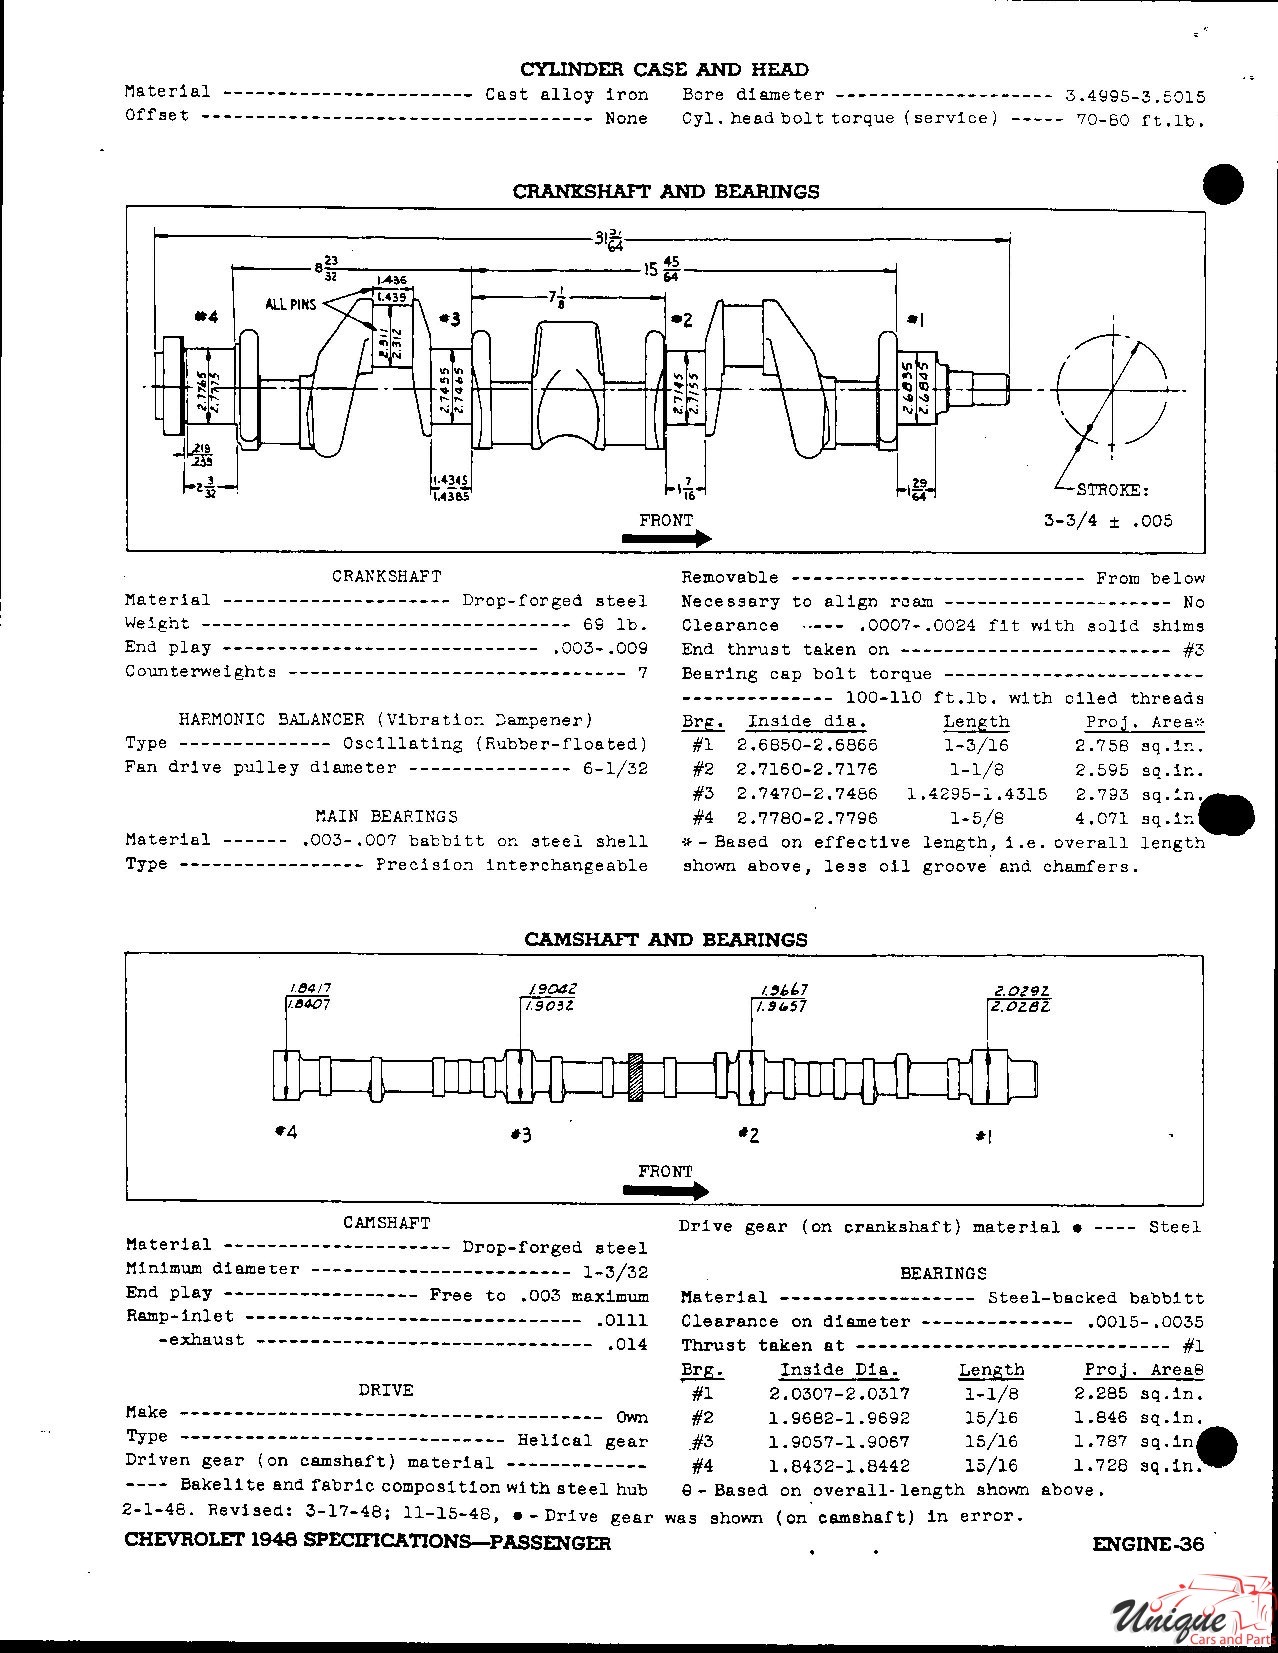 1948 Chevrolet Specifications Page 42